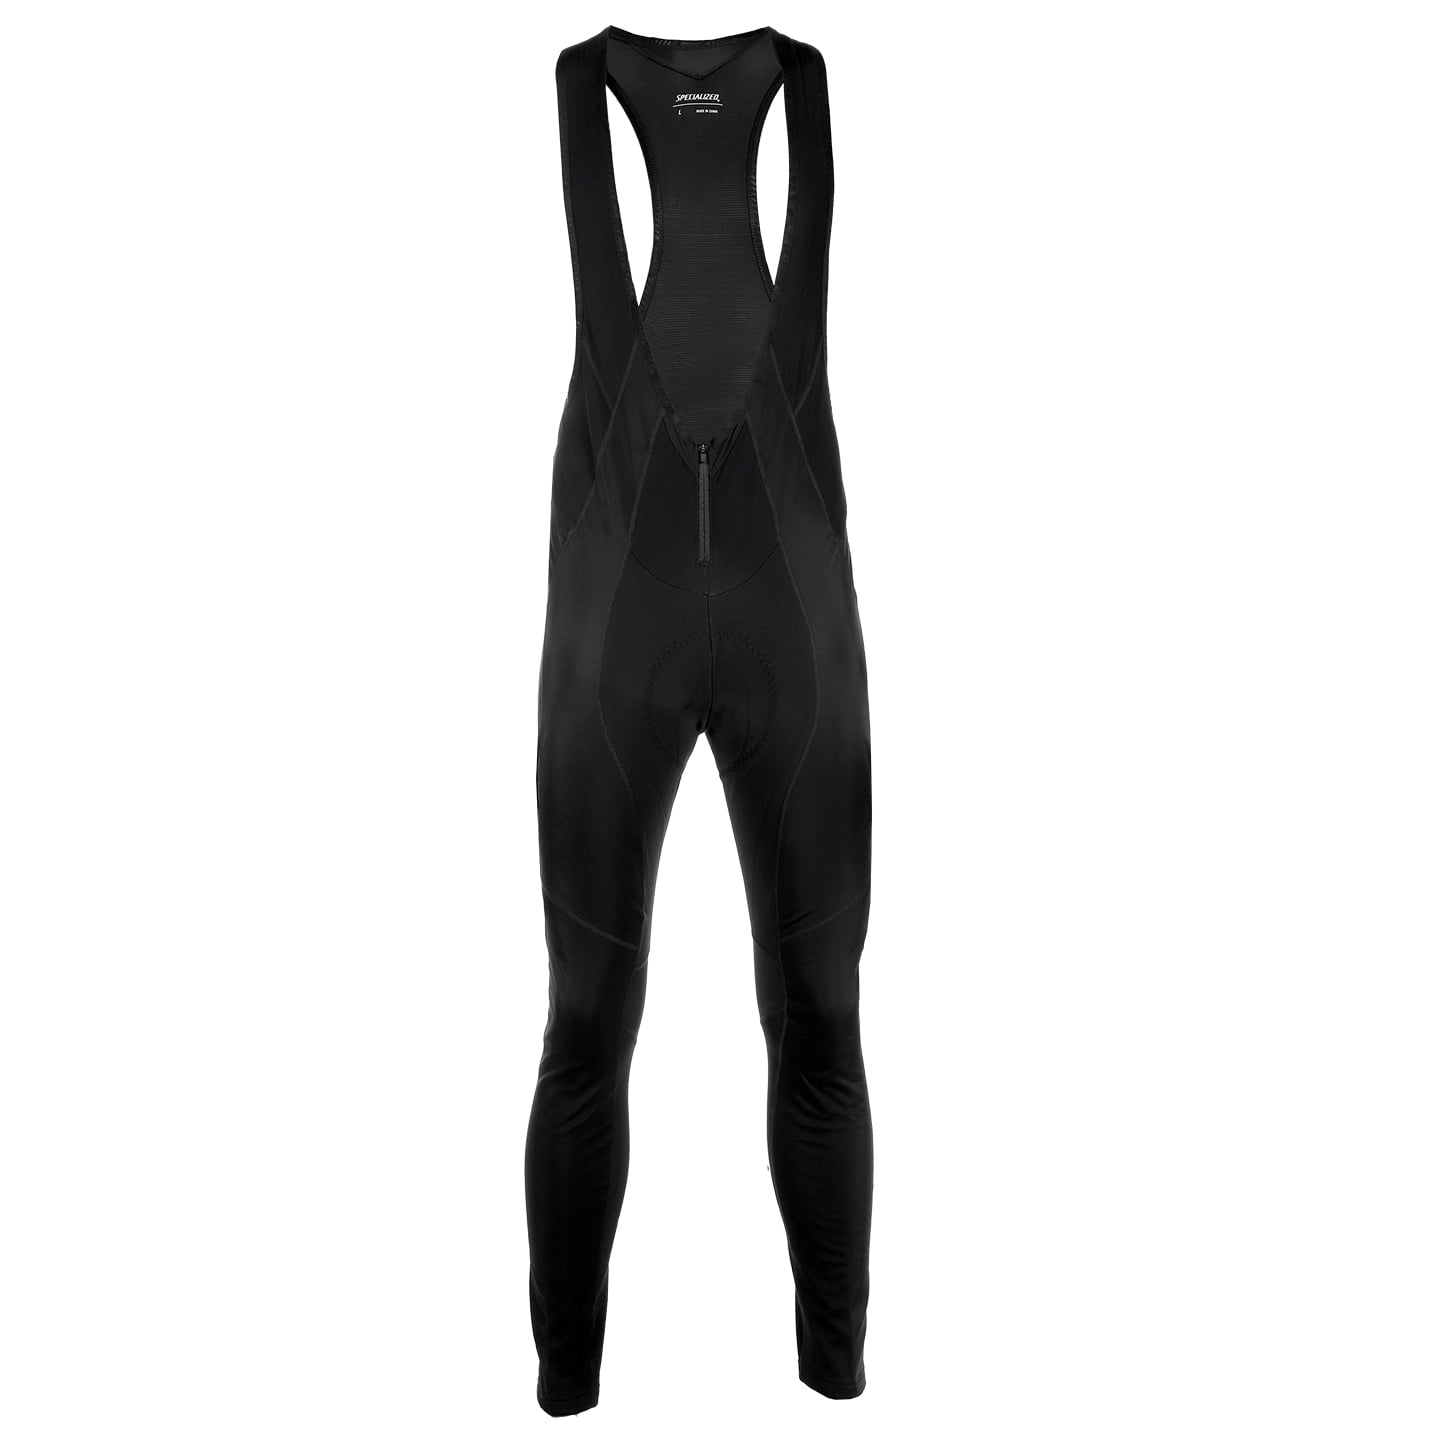 SPECIALIZED lange Tragerhose SL Expert Bib Tights Bib Tights, for men, size 2XL, Cycle tights, Cycling clothing